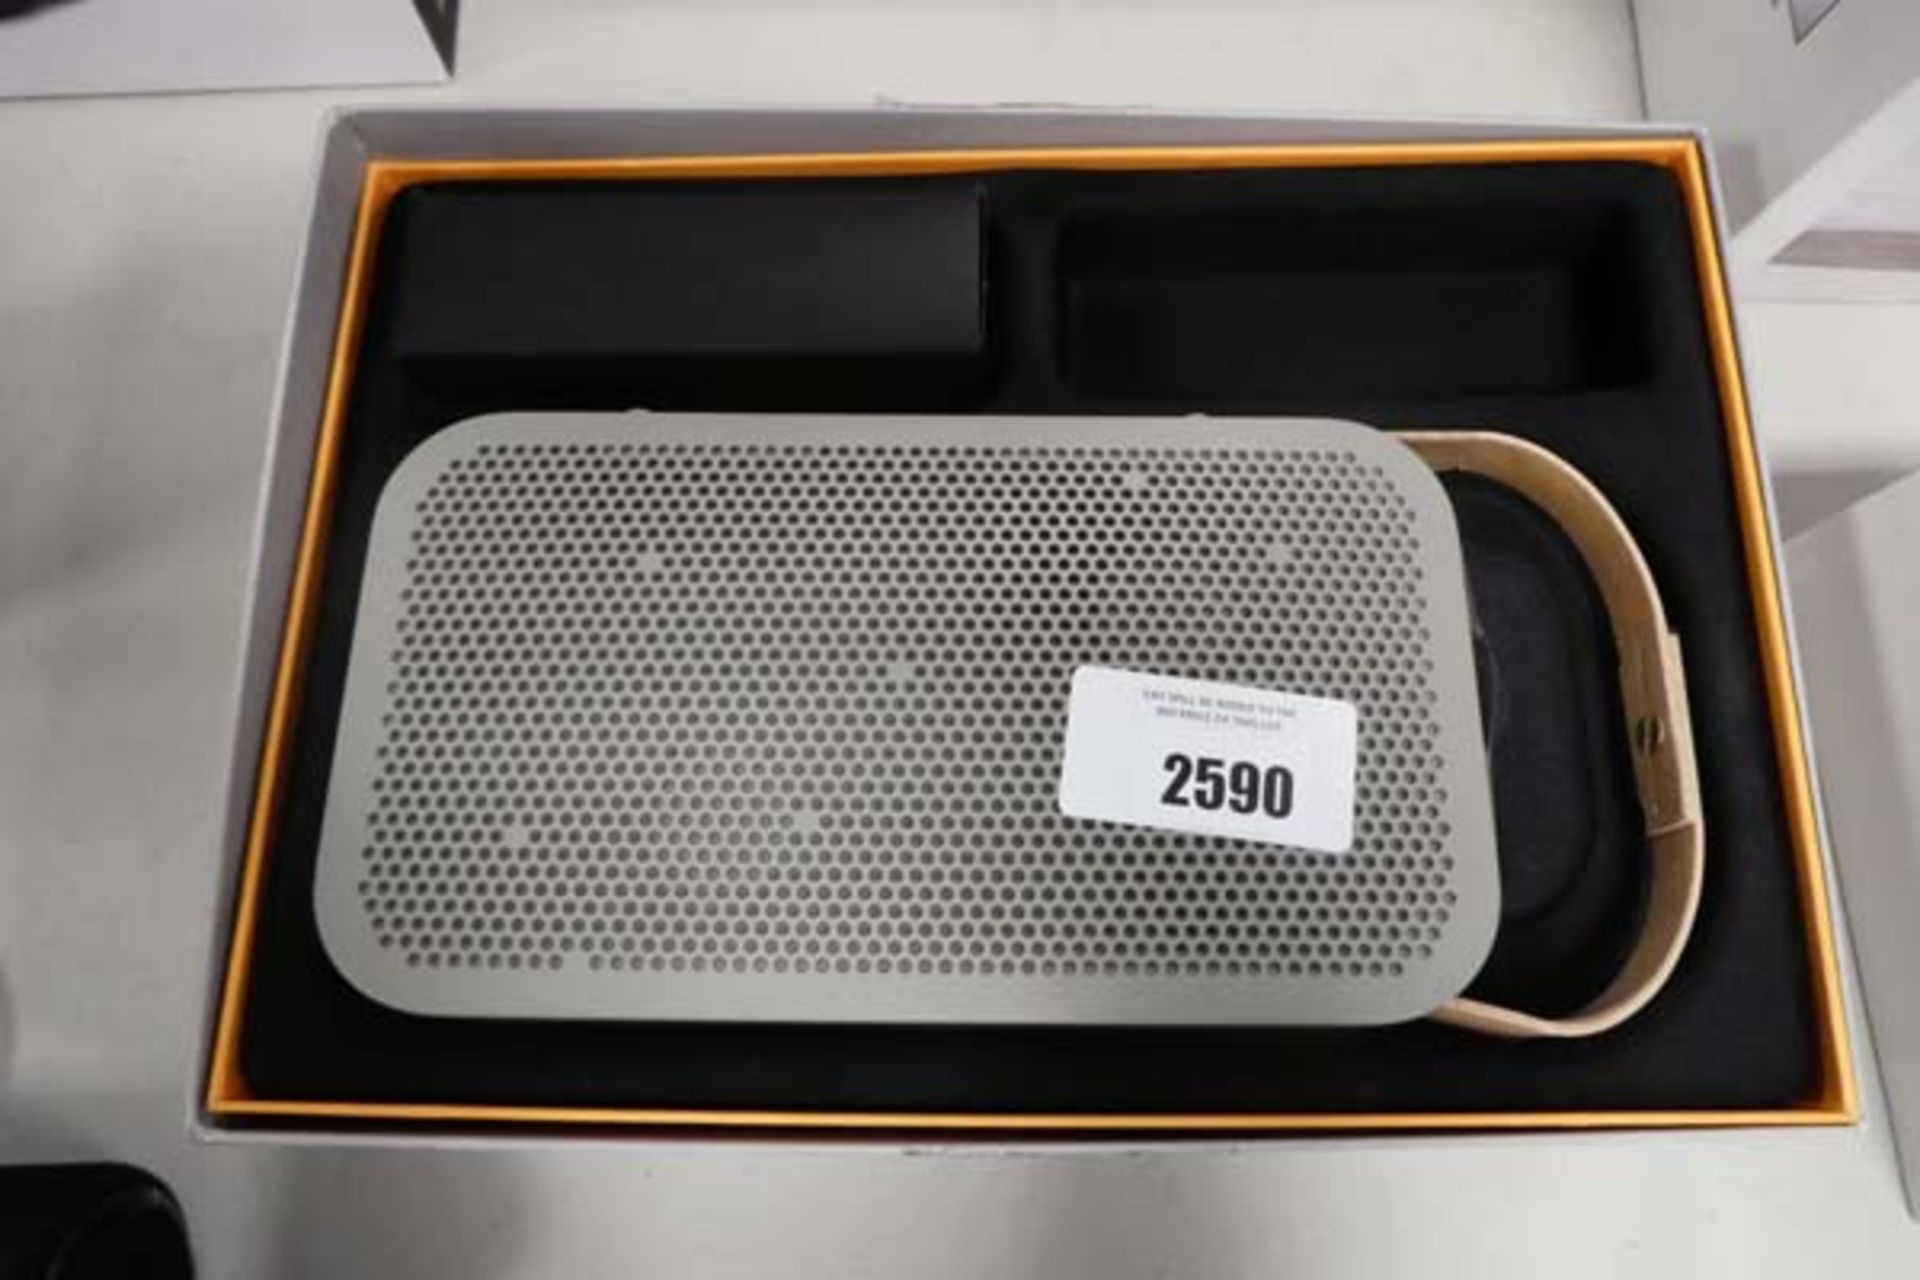 Bang & Olufsen A2 portable bluetooth speaker with box